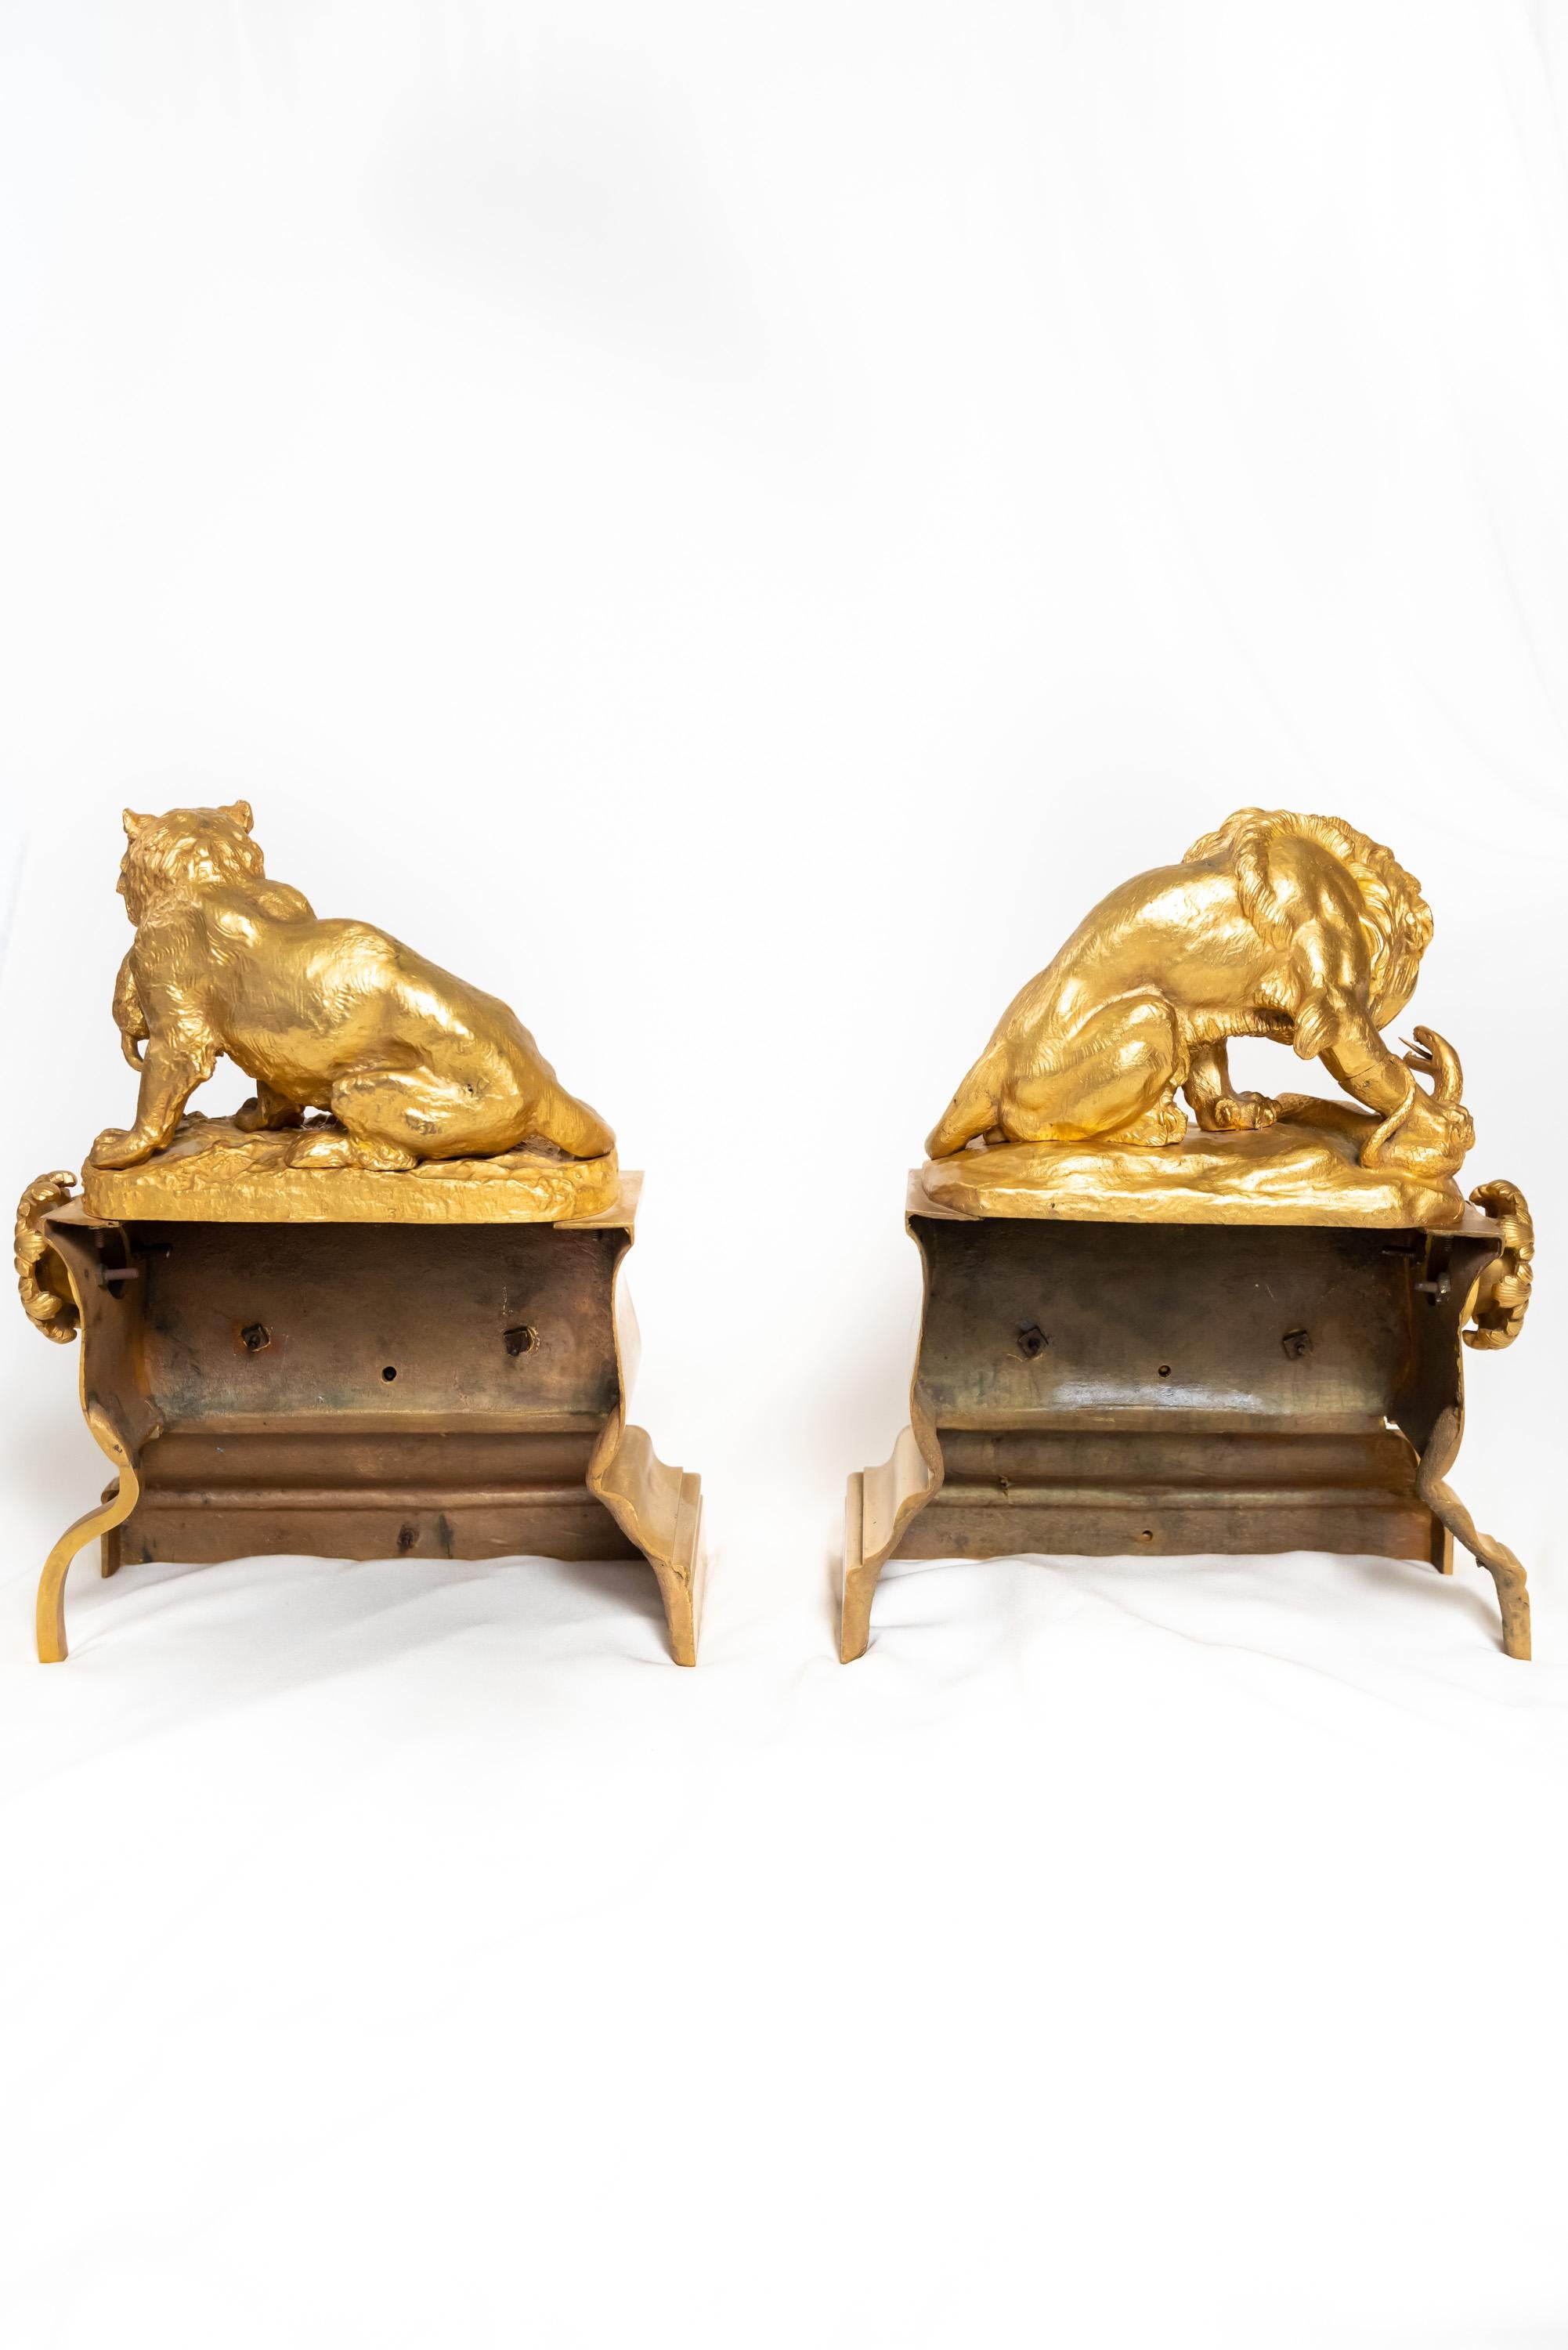 A Pair of Louis Philippe Era Animalier Chenets For Sale 8